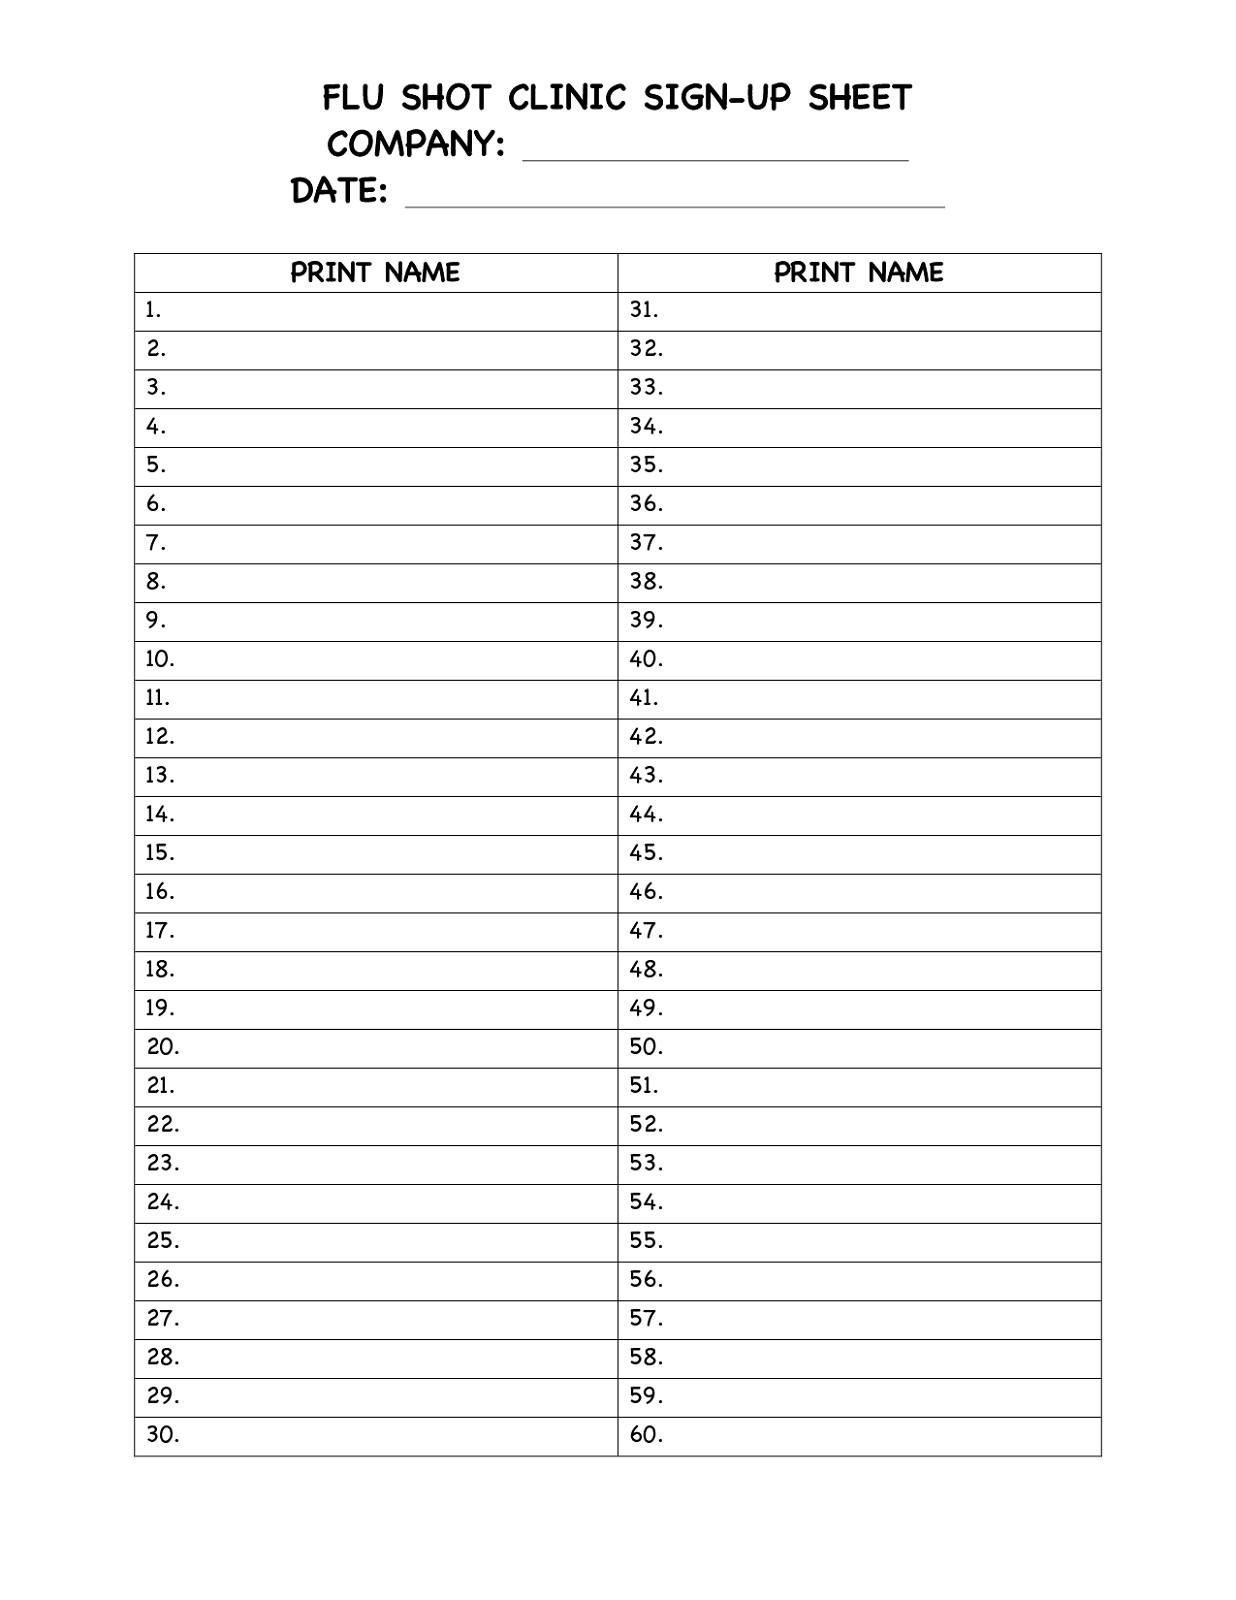 Potluck Sign Up Sheet Word For Events | Loving Printable Pertaining To Potluck Signup Sheet Template Word